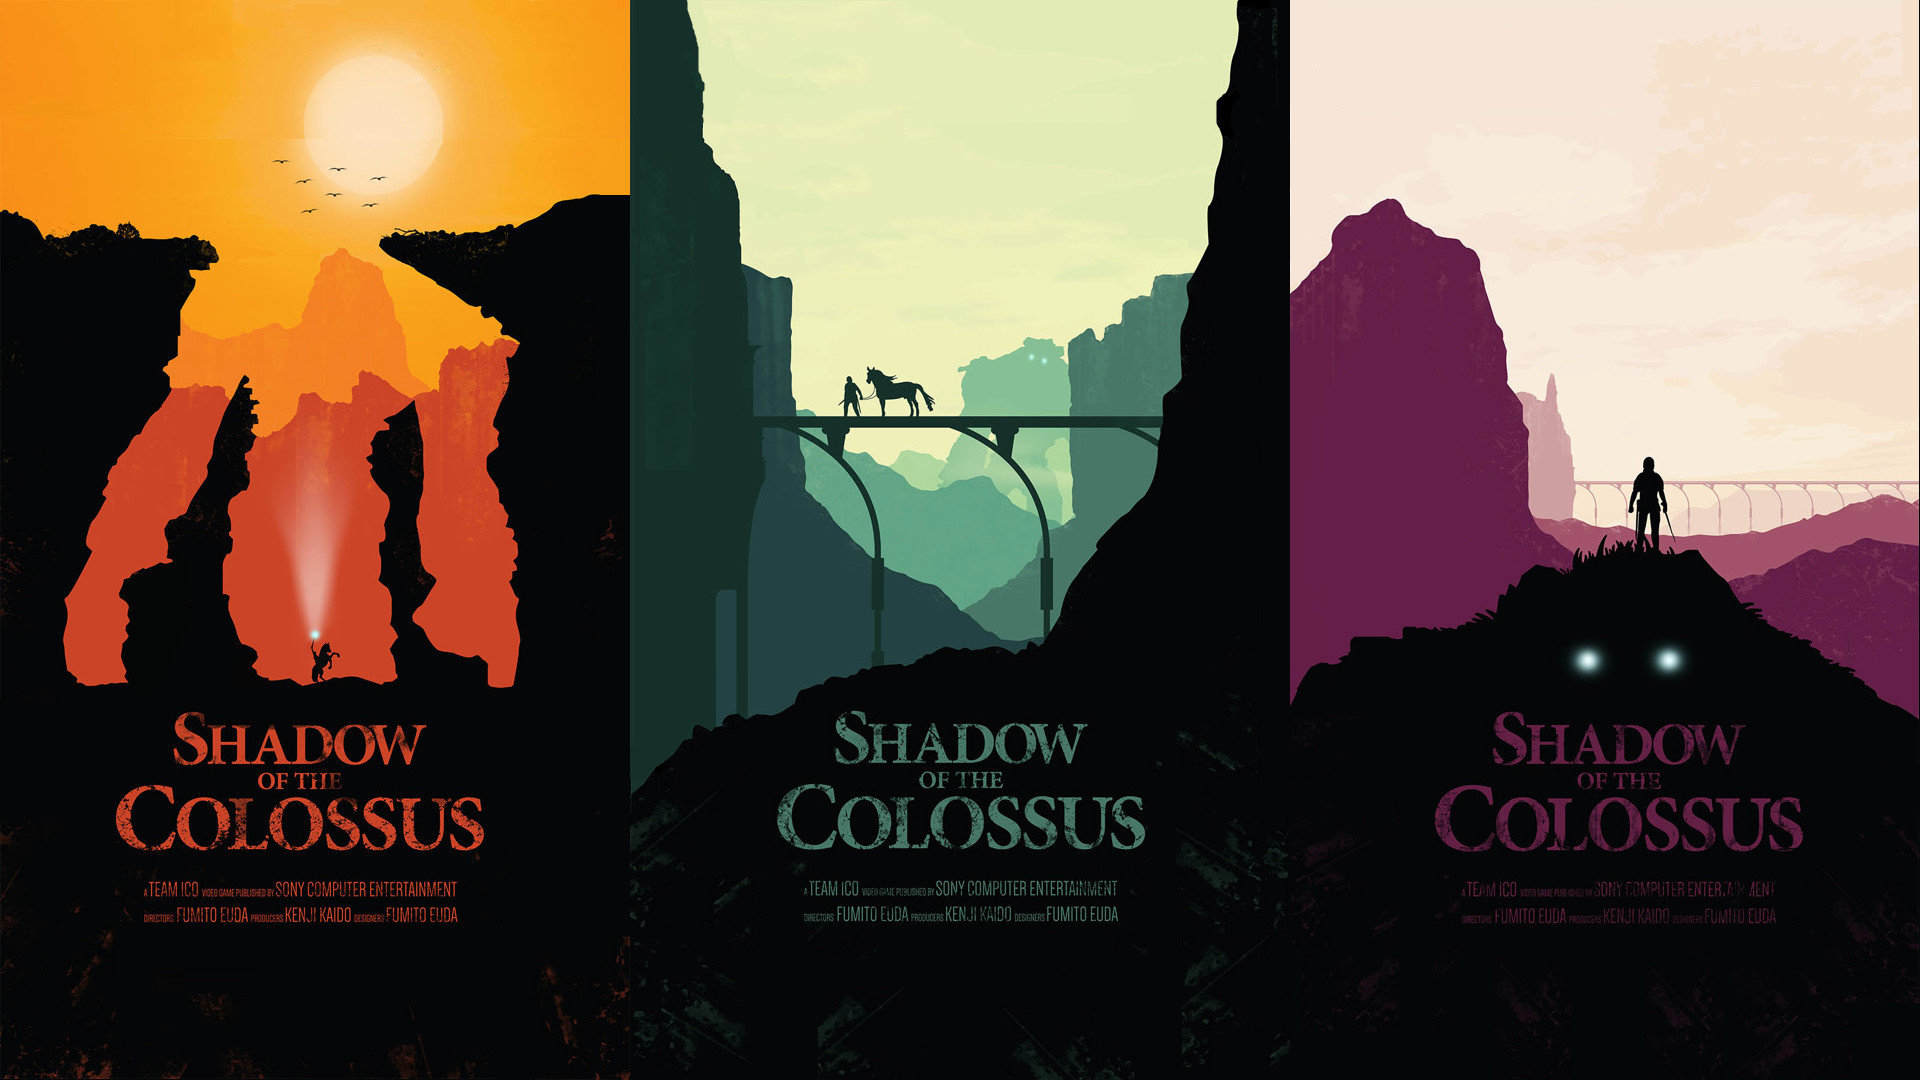 1920x1080 Shadow of the Colossus fantasy wallpaper |  | 228613 | WallpaperUP